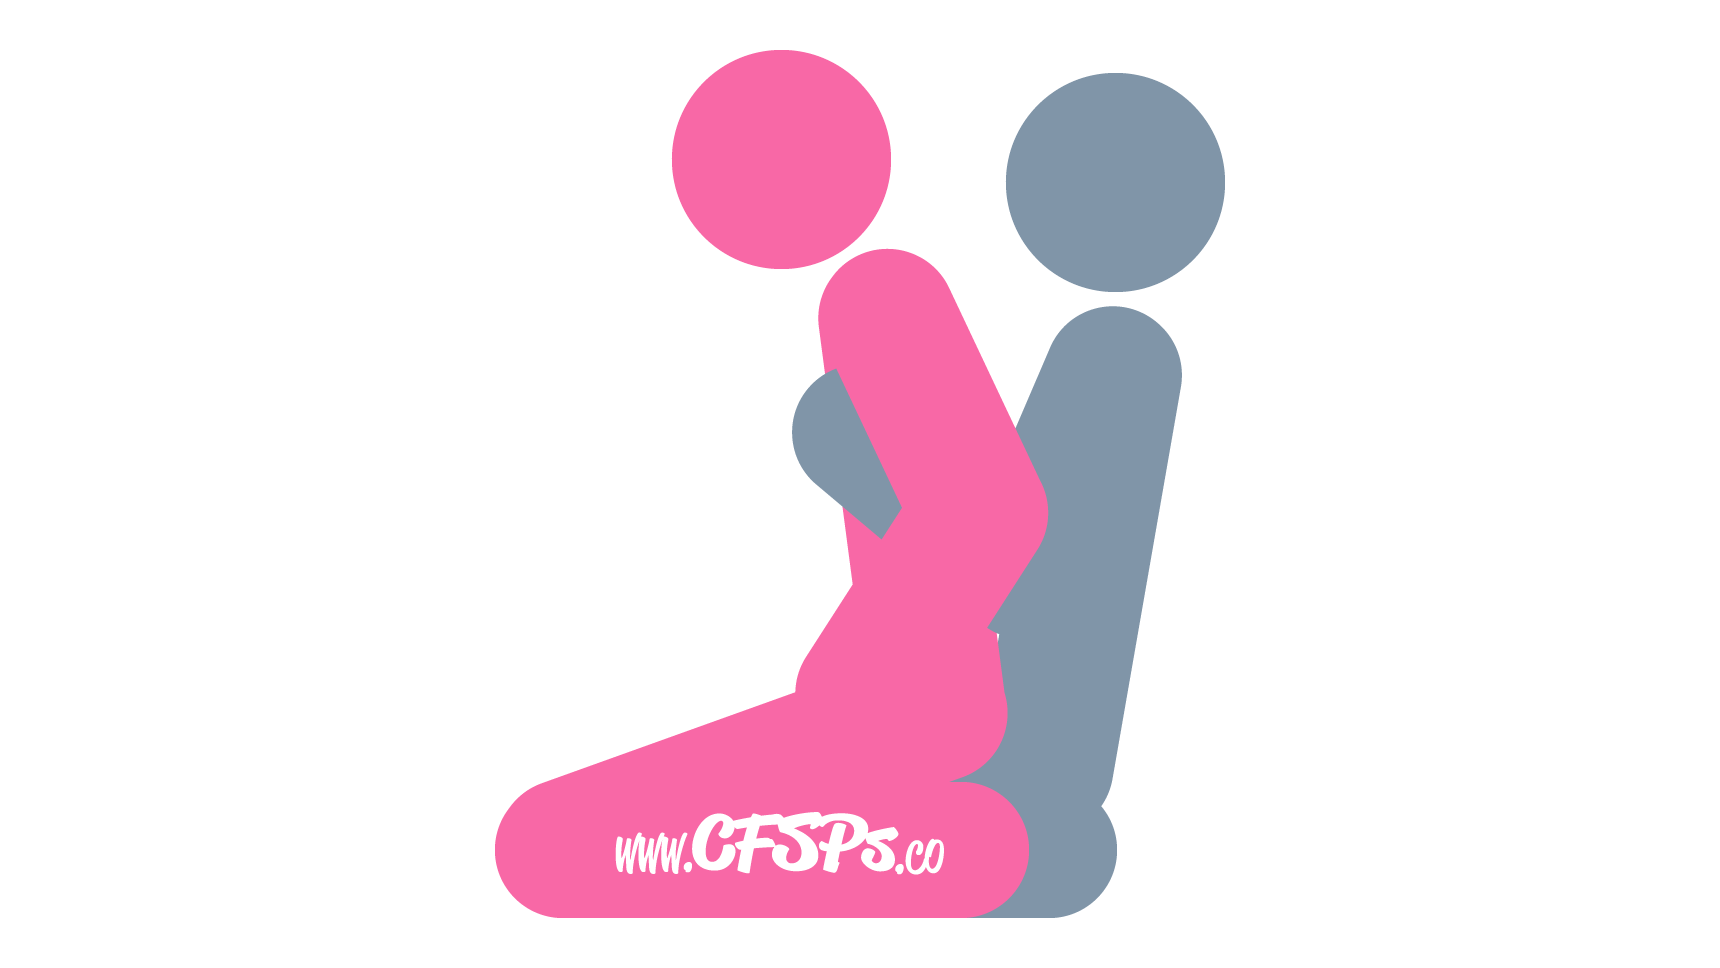 This stick figure image depicts a man and woman having sex in the Lap Dance sex position. The man is kneeling and sitting back on his feet. The woman is kneeling and sitting back on the man's lap while facing away from him, and the man is caressing her breasts while having sex with her.